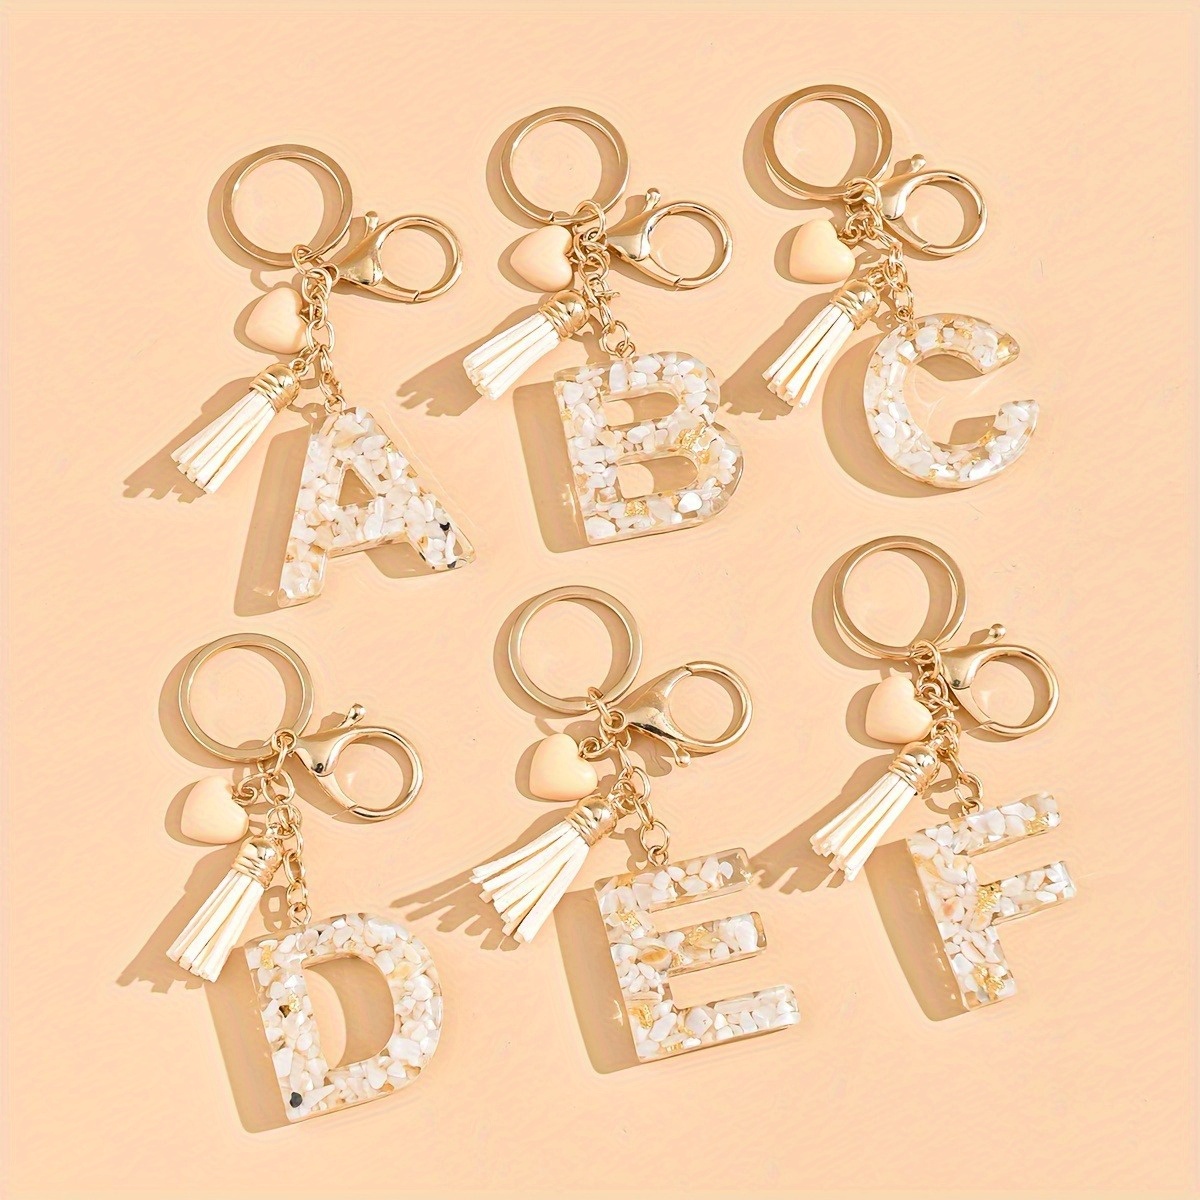 

Resin Alphabet Keyring With Heart & Tassel Charm, Lobster Clasp Closure, Valentine's Day Gift, Single Piece Decorative Ladies Keychain With Love Theme - Ideal For Friends.